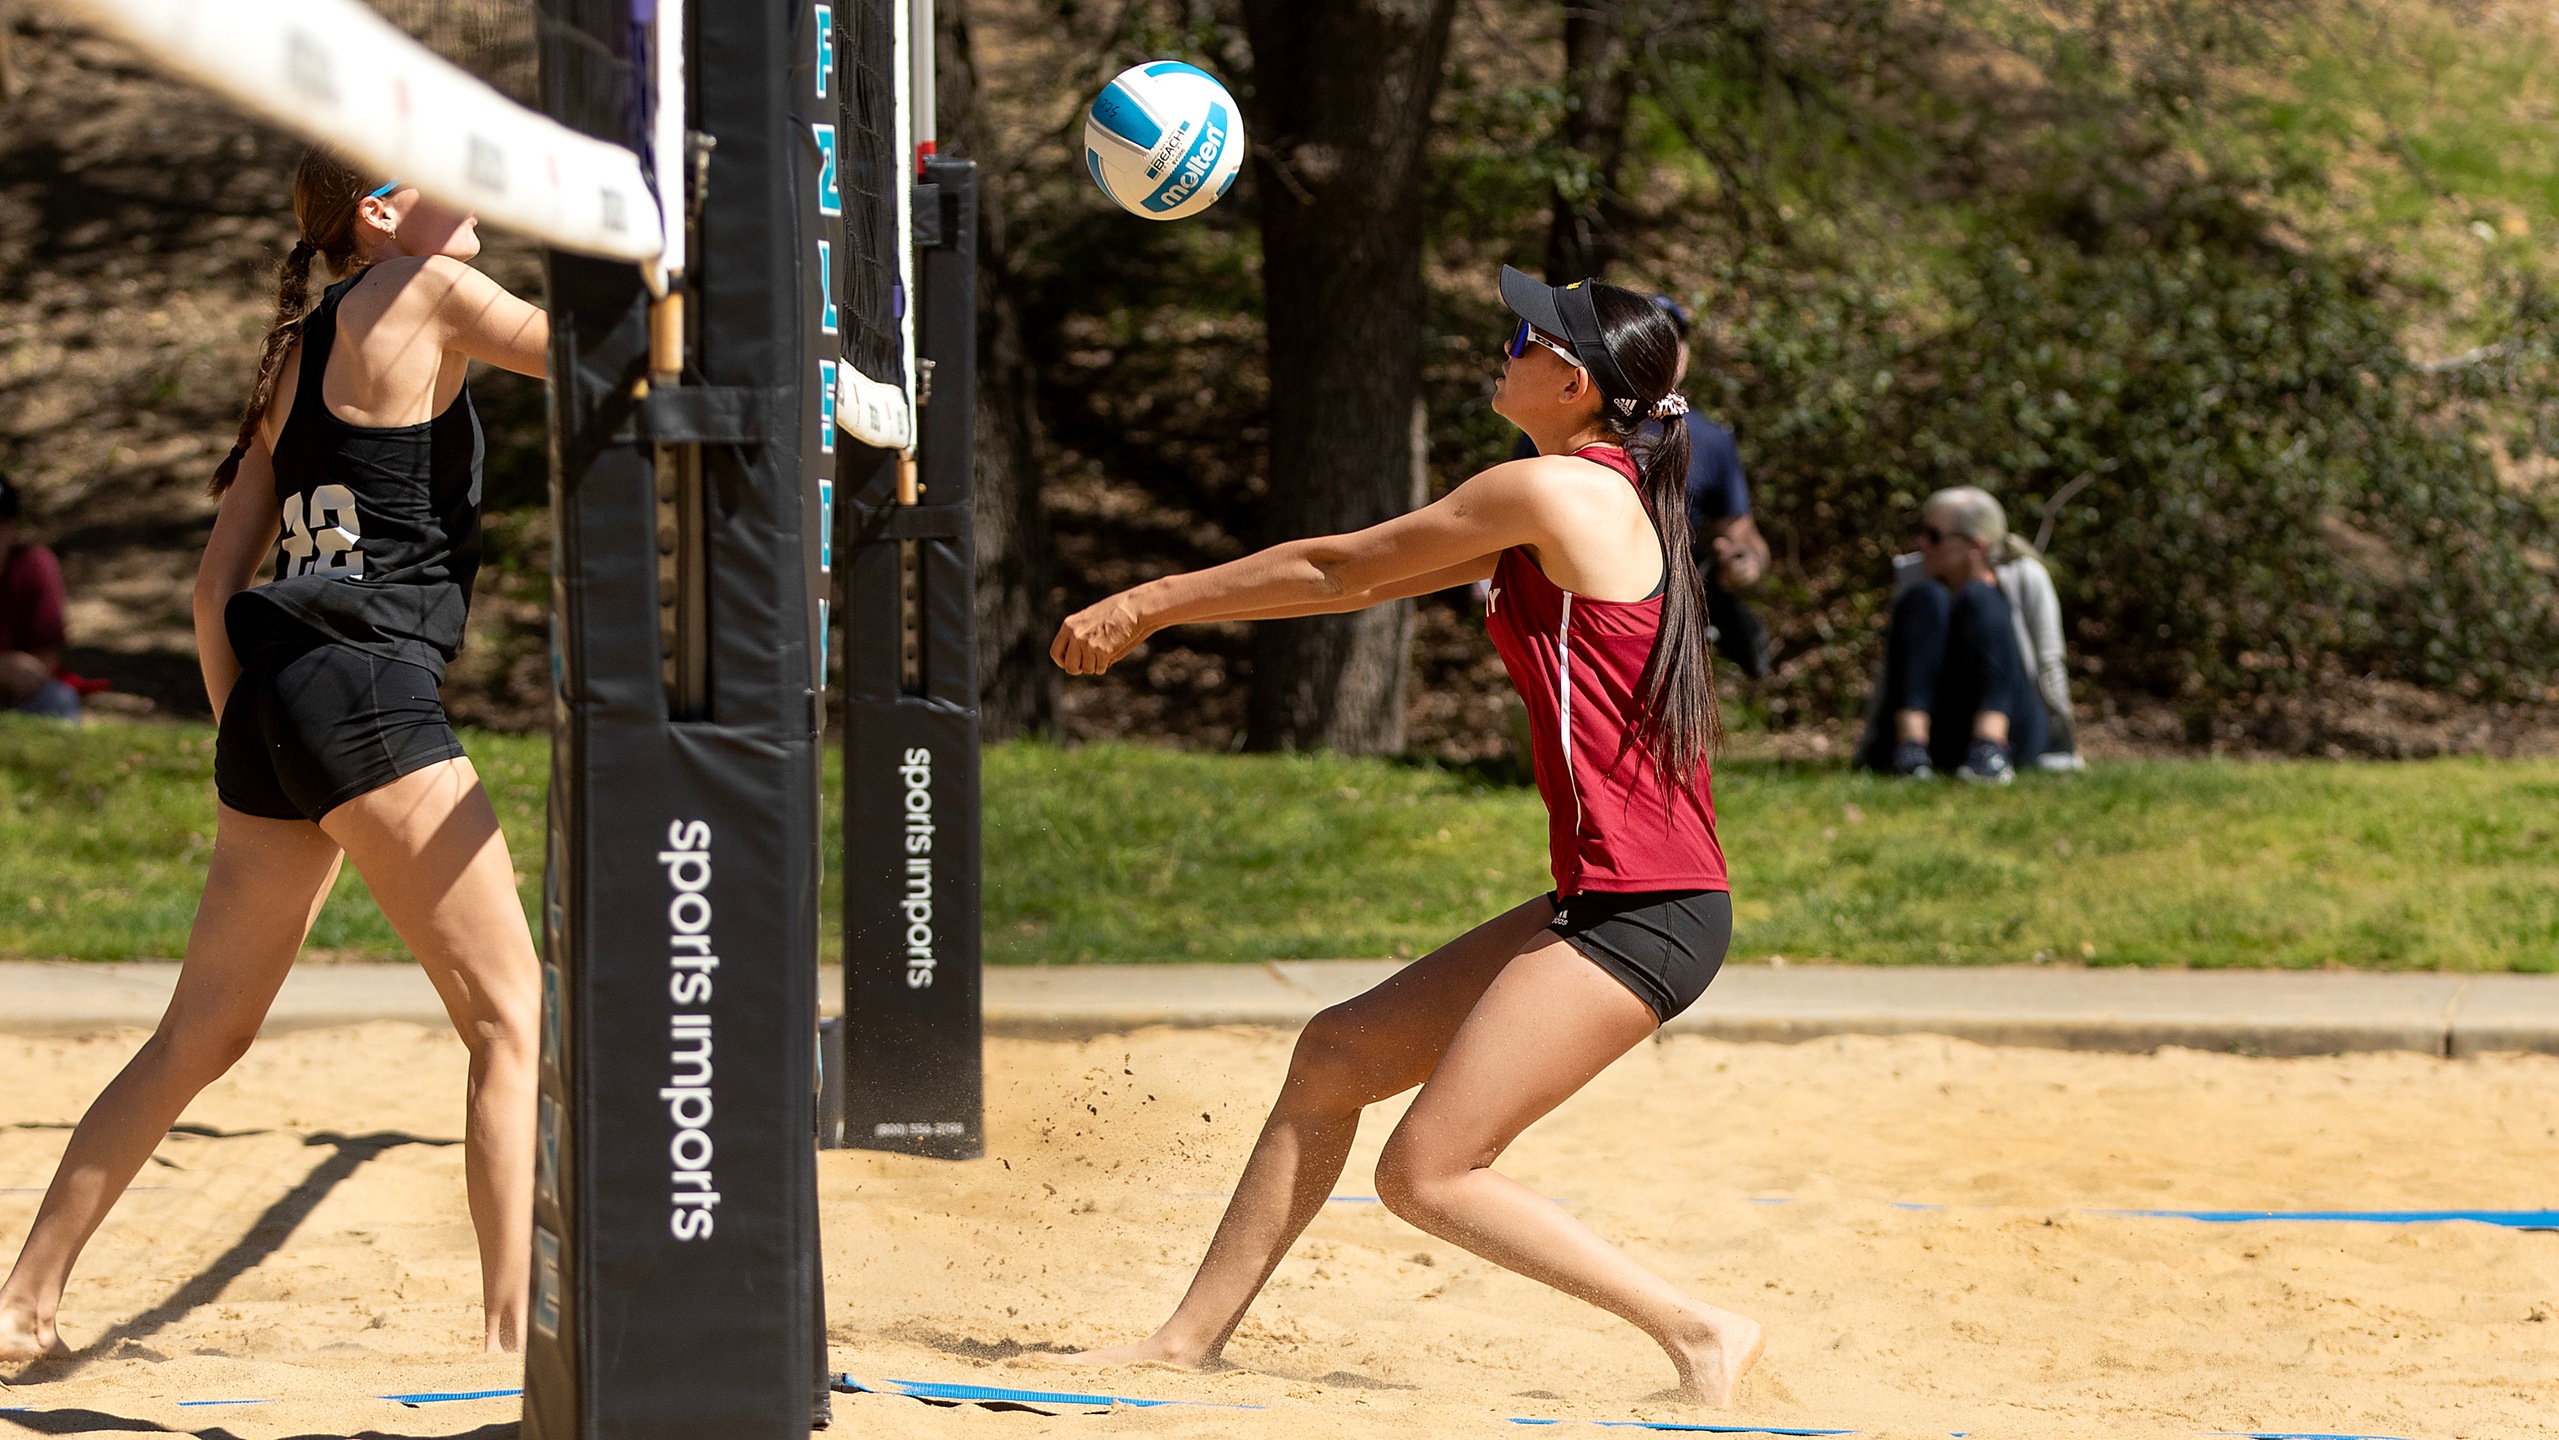 Sierra hands Sac City a 4-1 loss in Beach Volleyball on Friday in Stockton